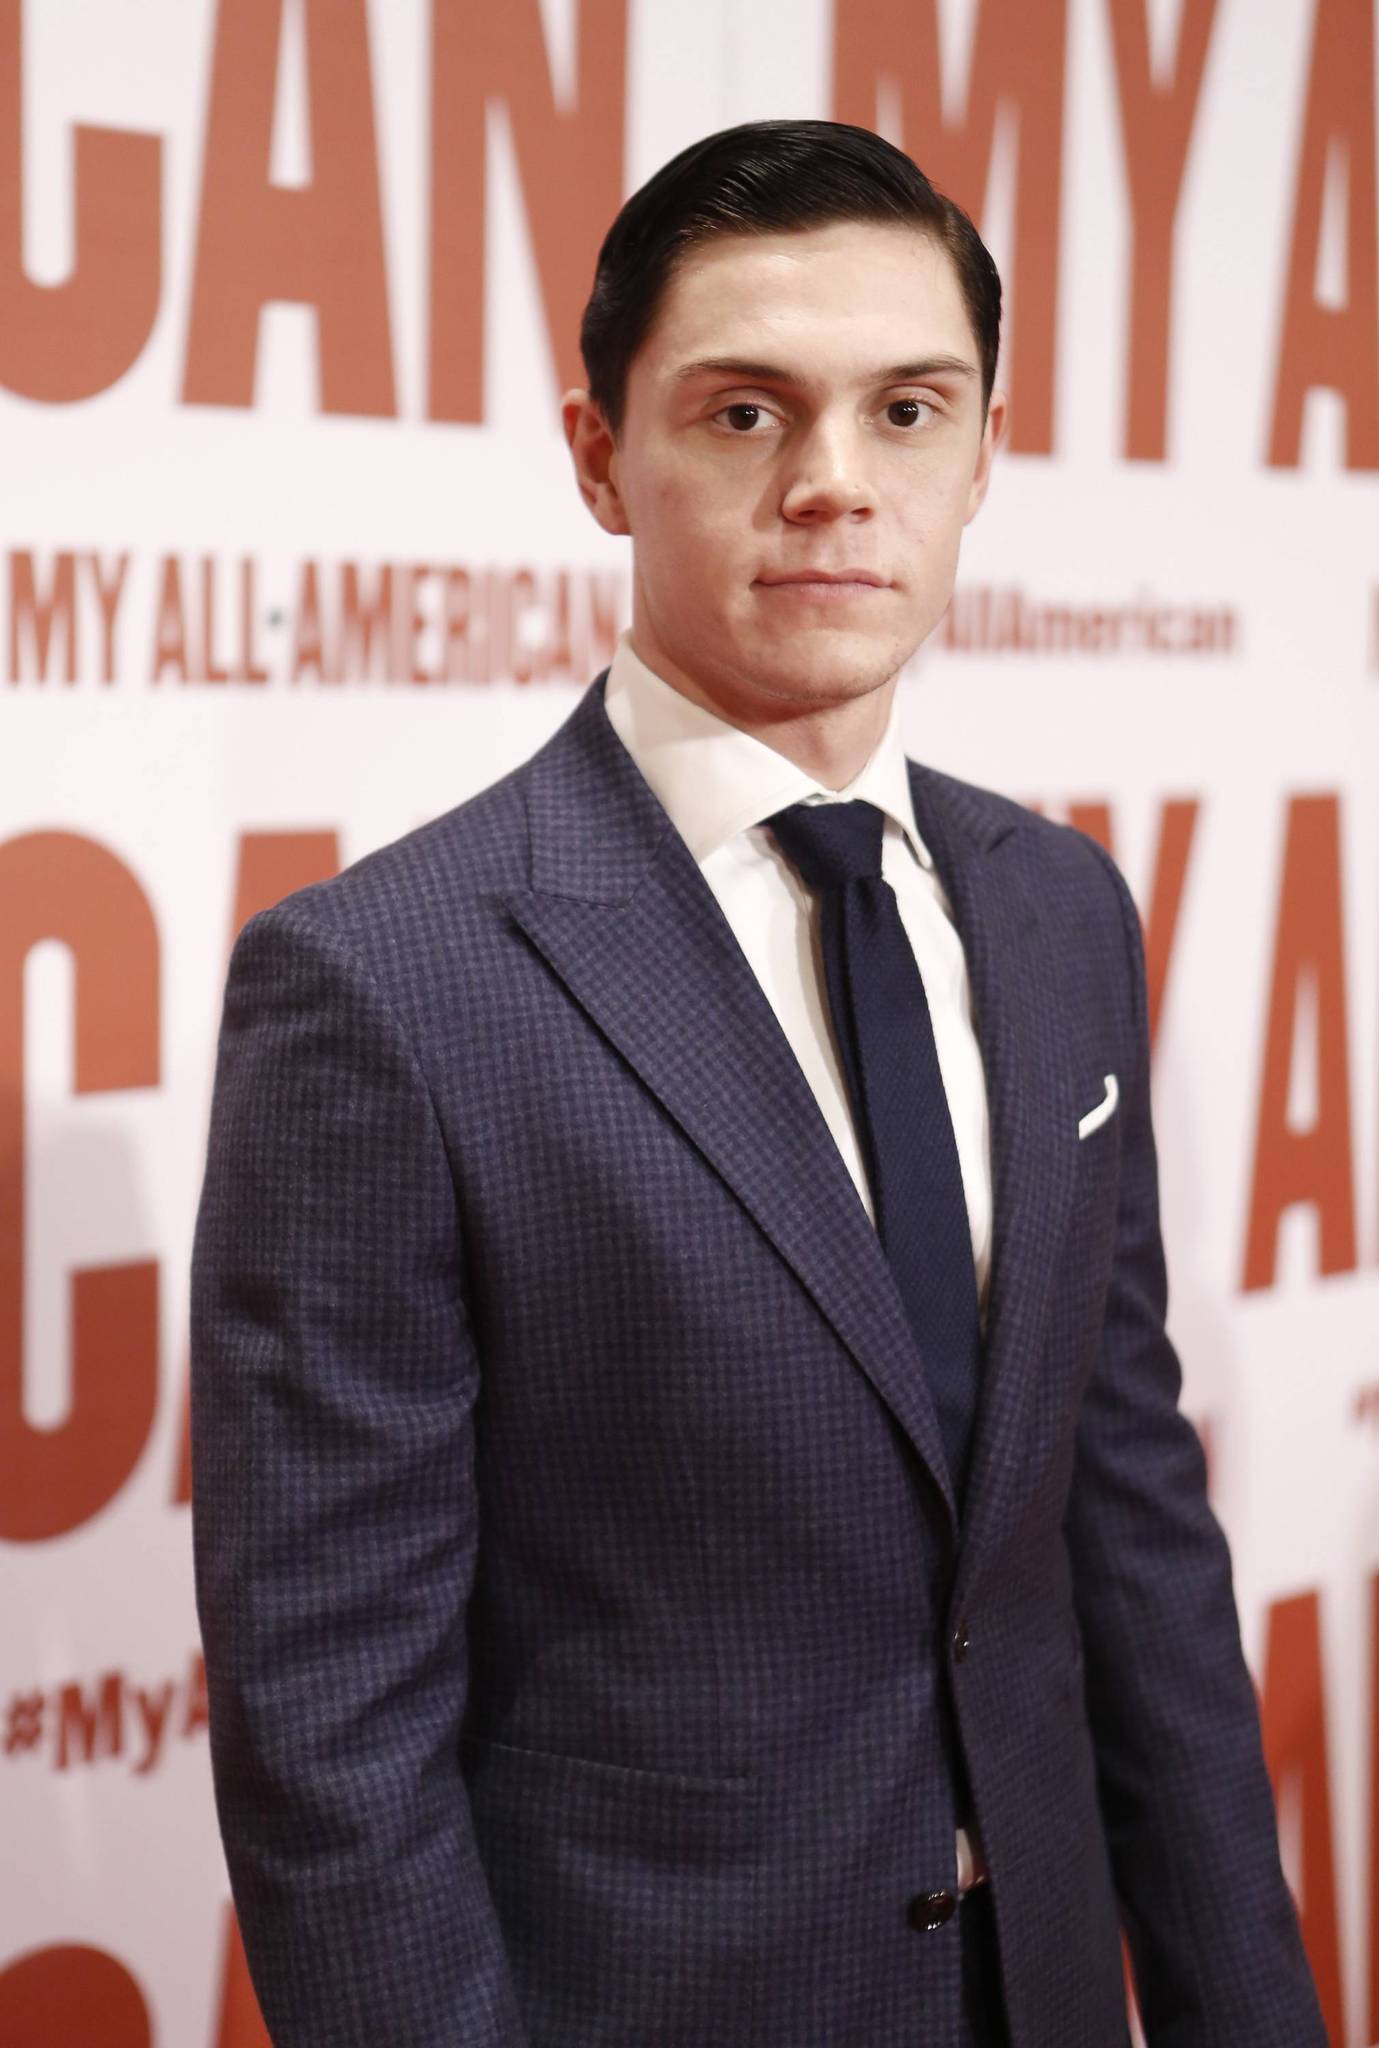 Evan Peters at event of My All American (2015)